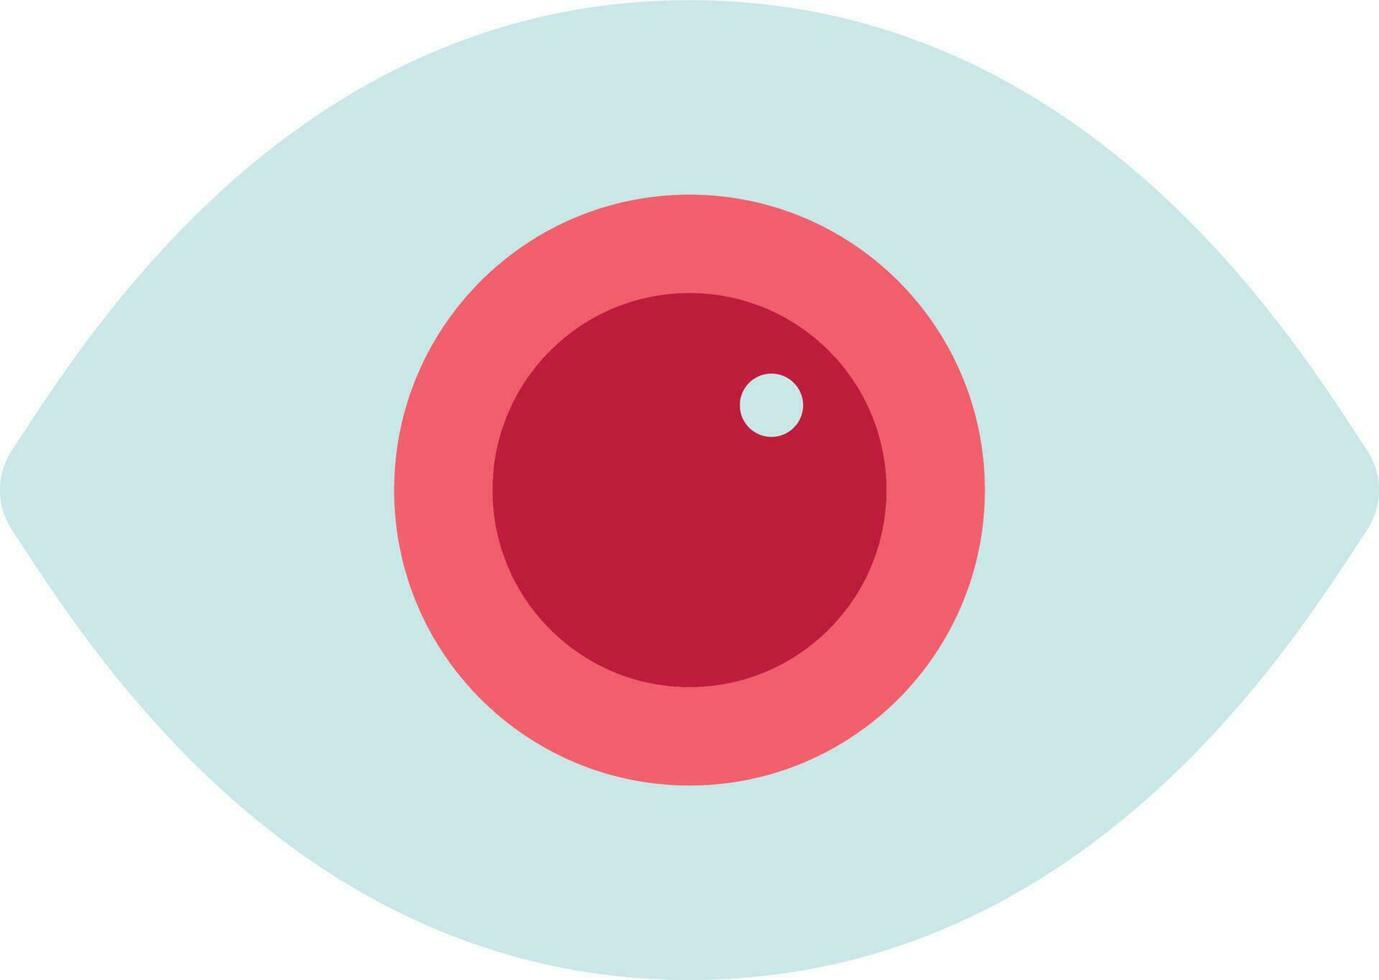 Grey And Red Eye Anatomy Icon In Flat Style. vector